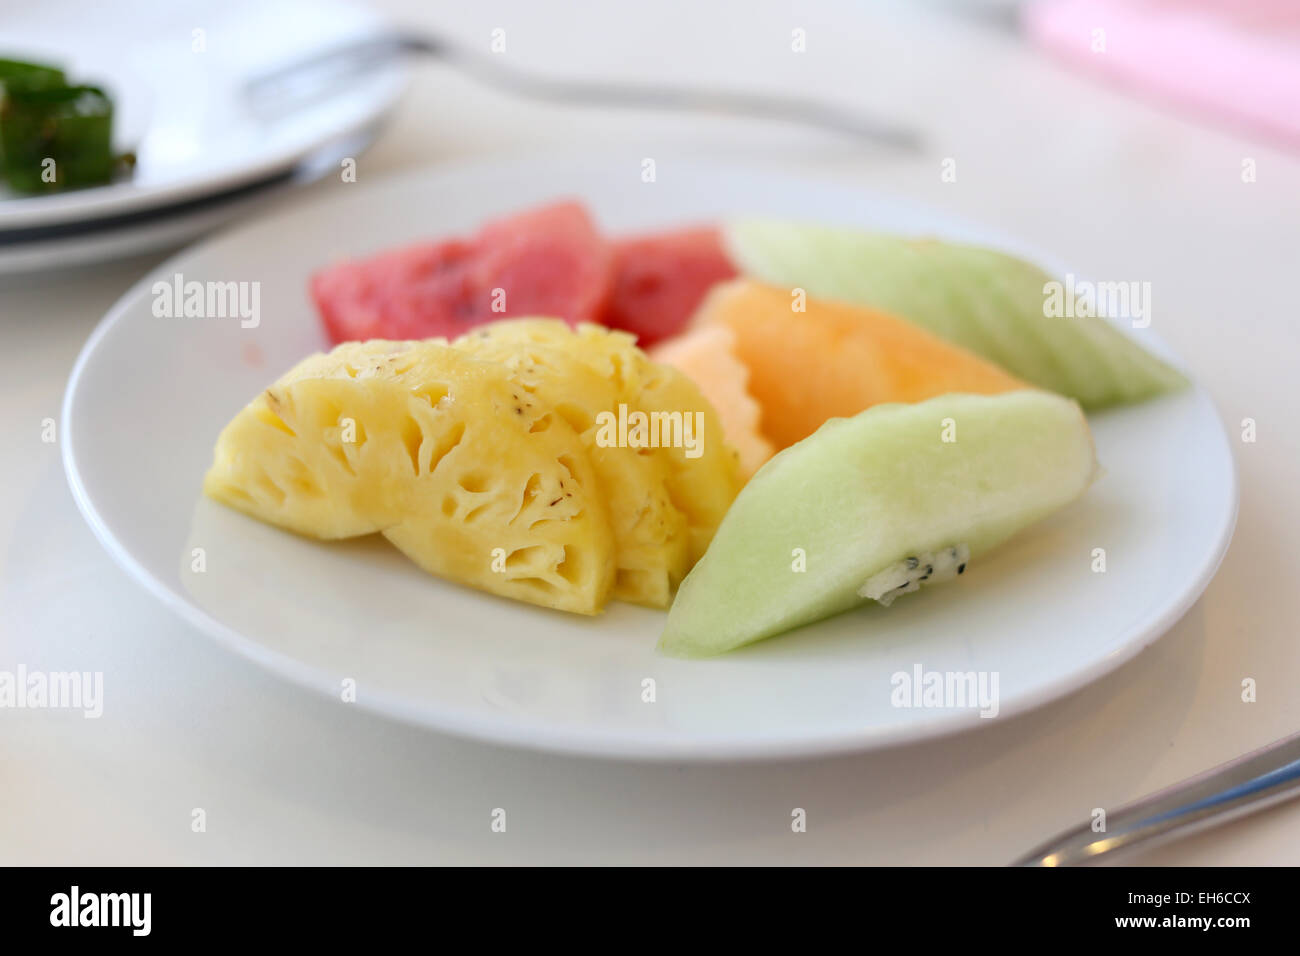 Mixed fruits in white dish on the foods table. Stock Photo